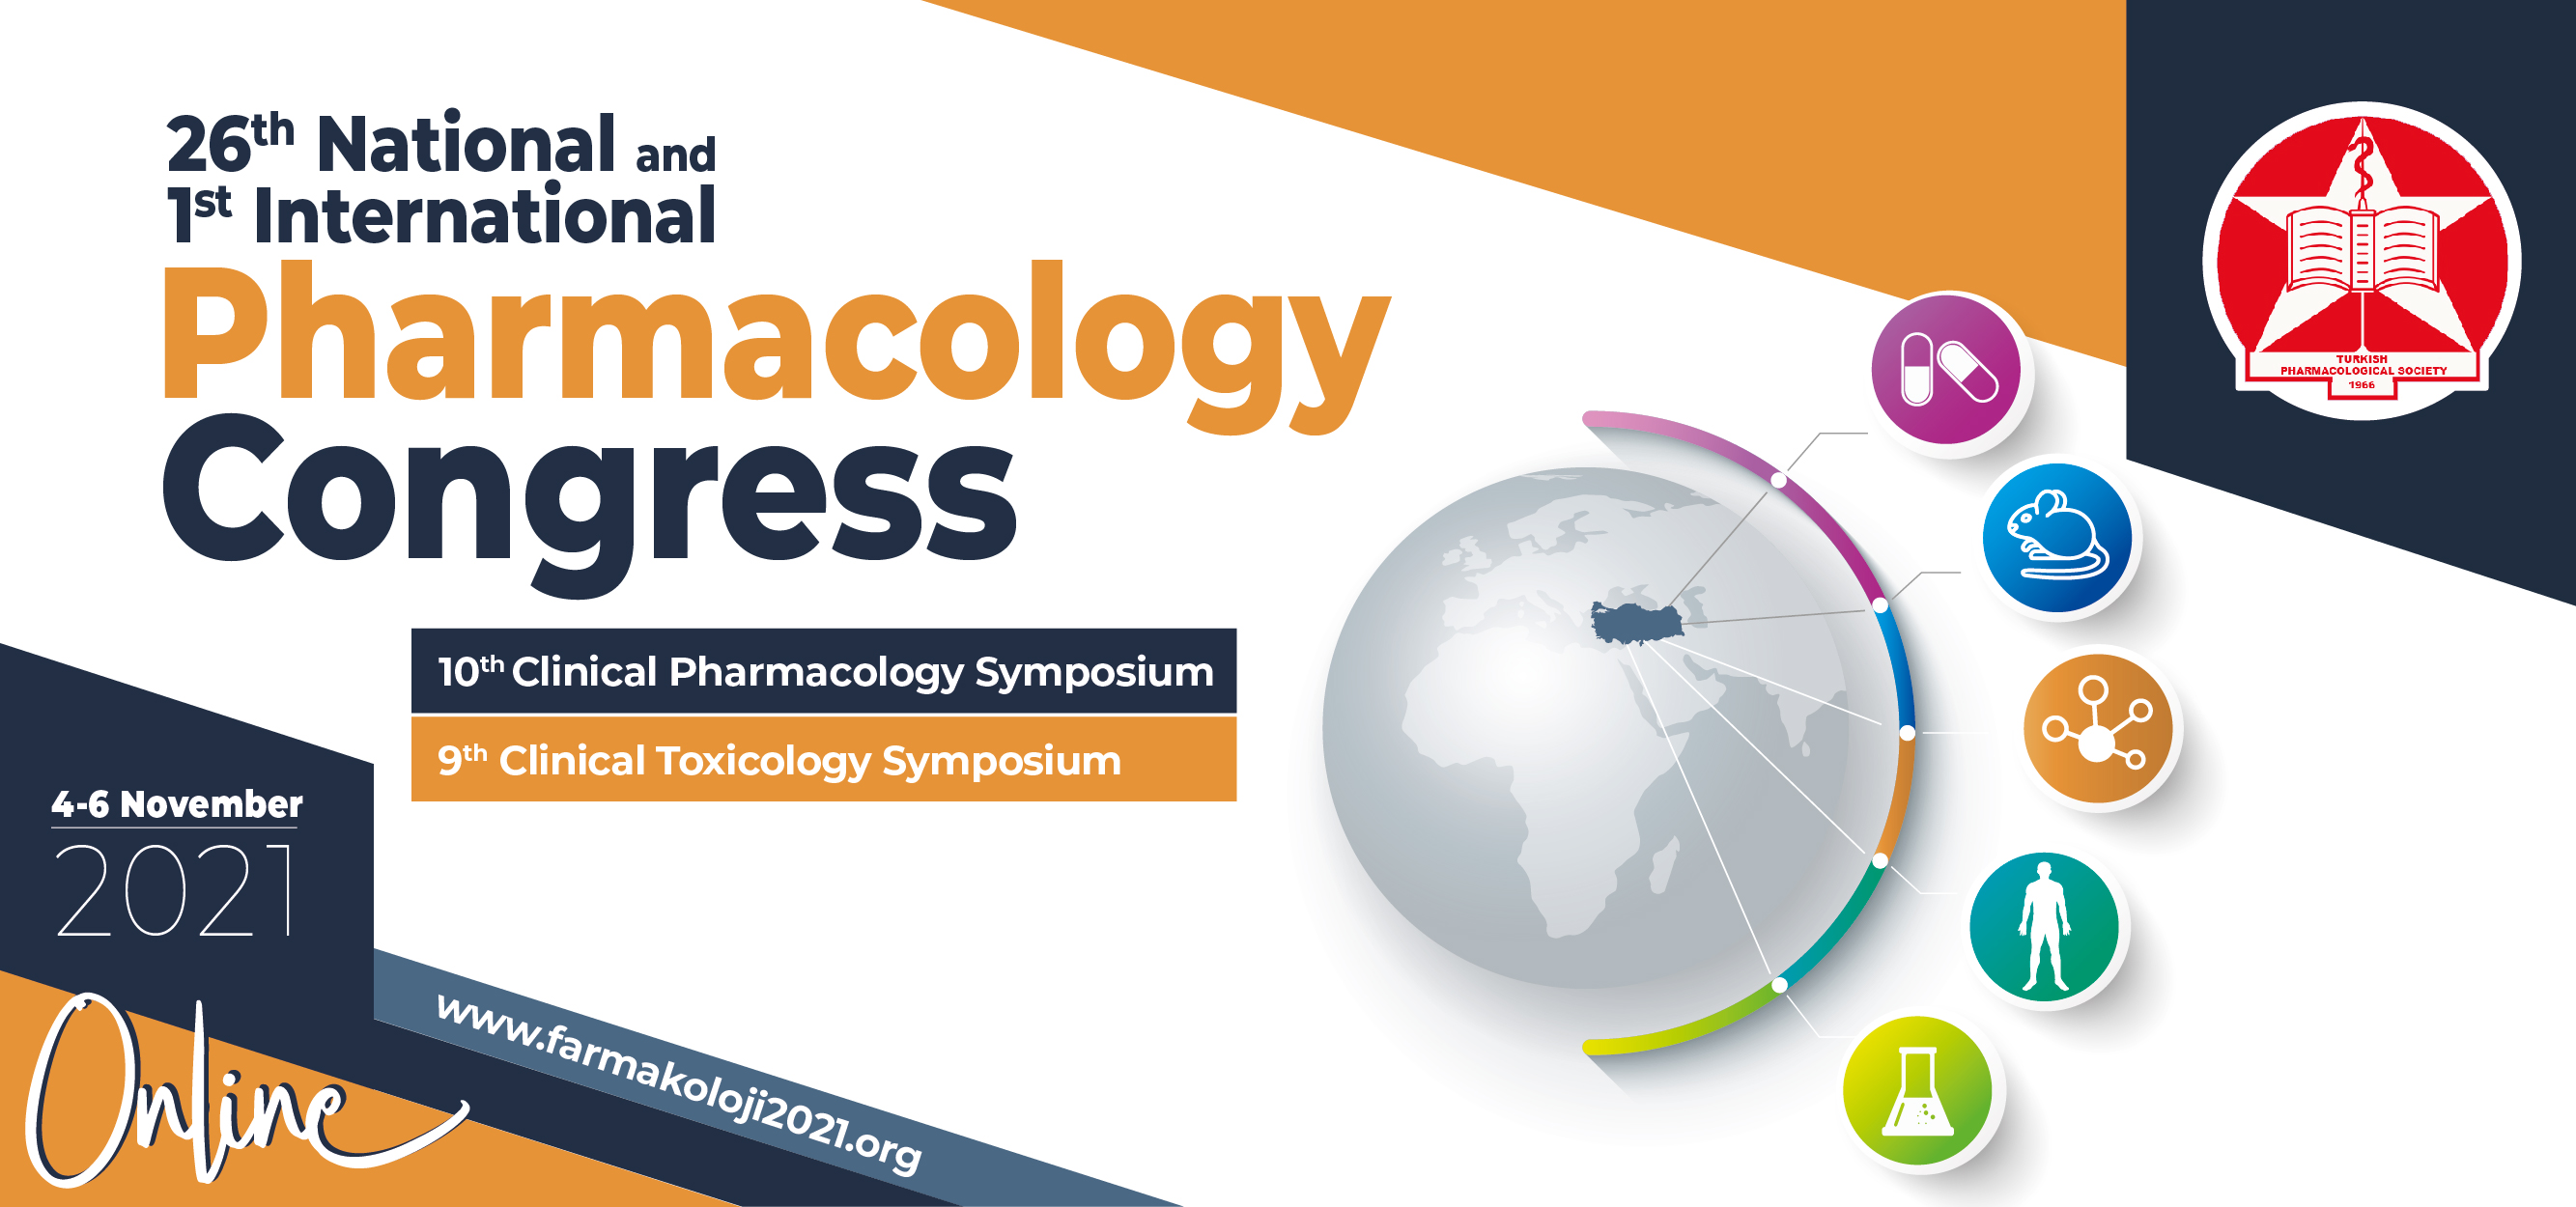 Announcement of the 26th National and 1st International Pharmacology Congress